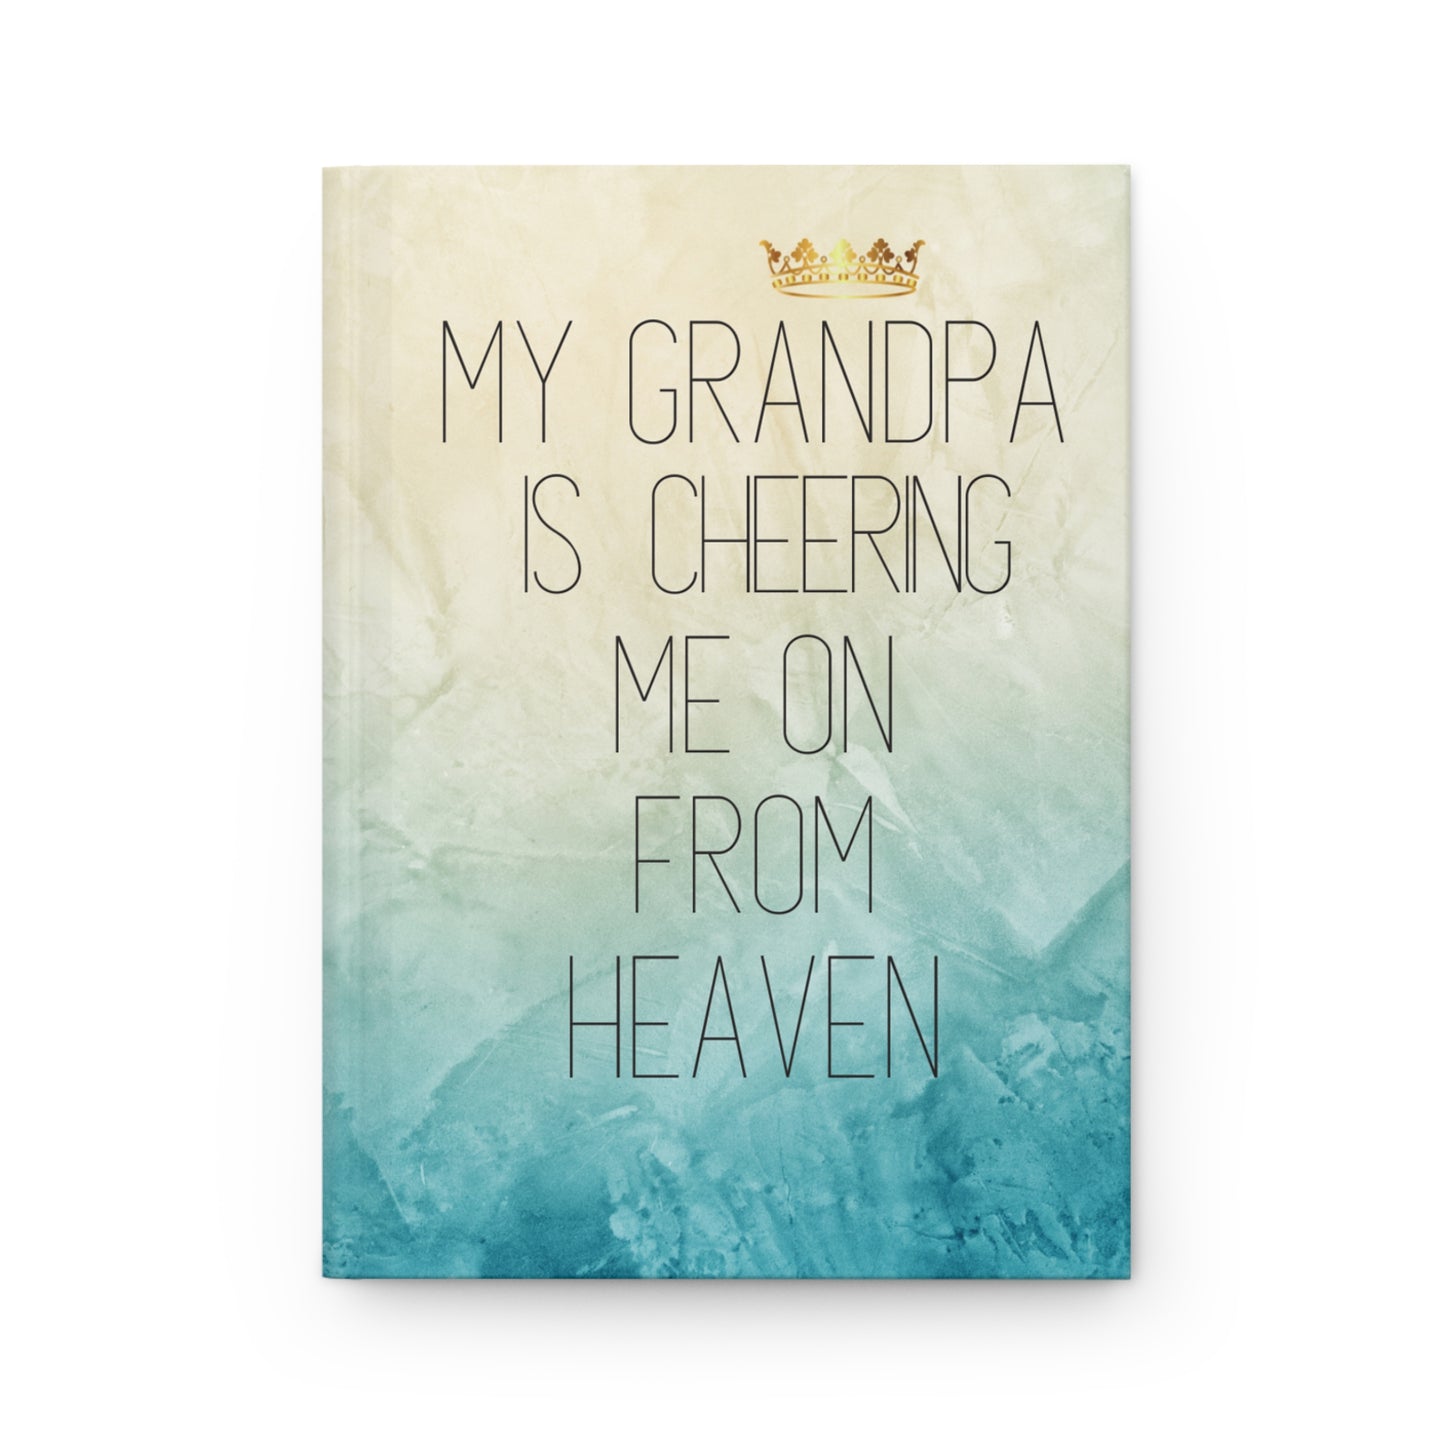 Grief Journal for Loss of Grandfather, Cheering Me On From Heaven